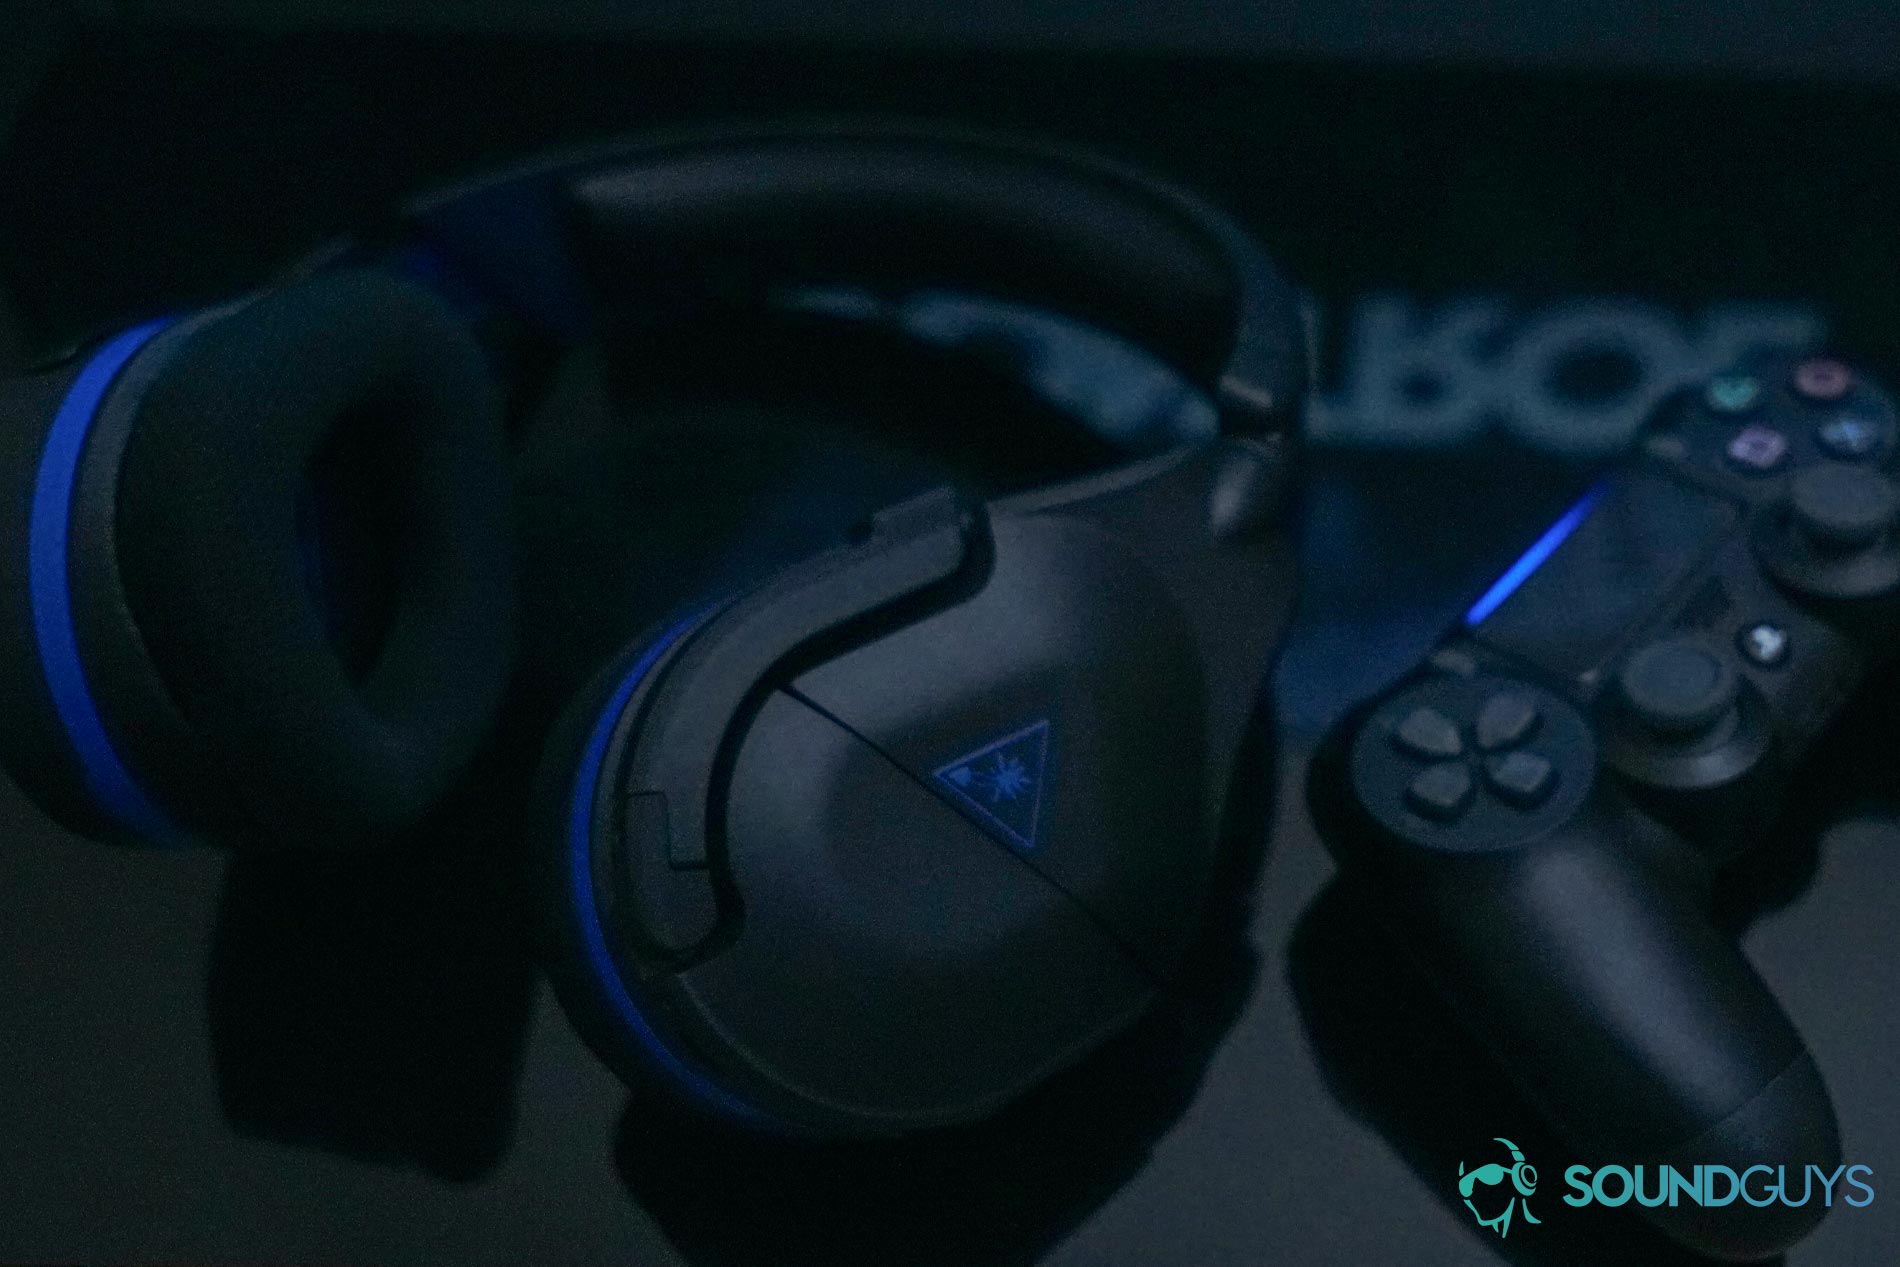 The Turtle Beach Stealth 600 Gen 2 gaming headset next to a playStation 4 DualShock controller.